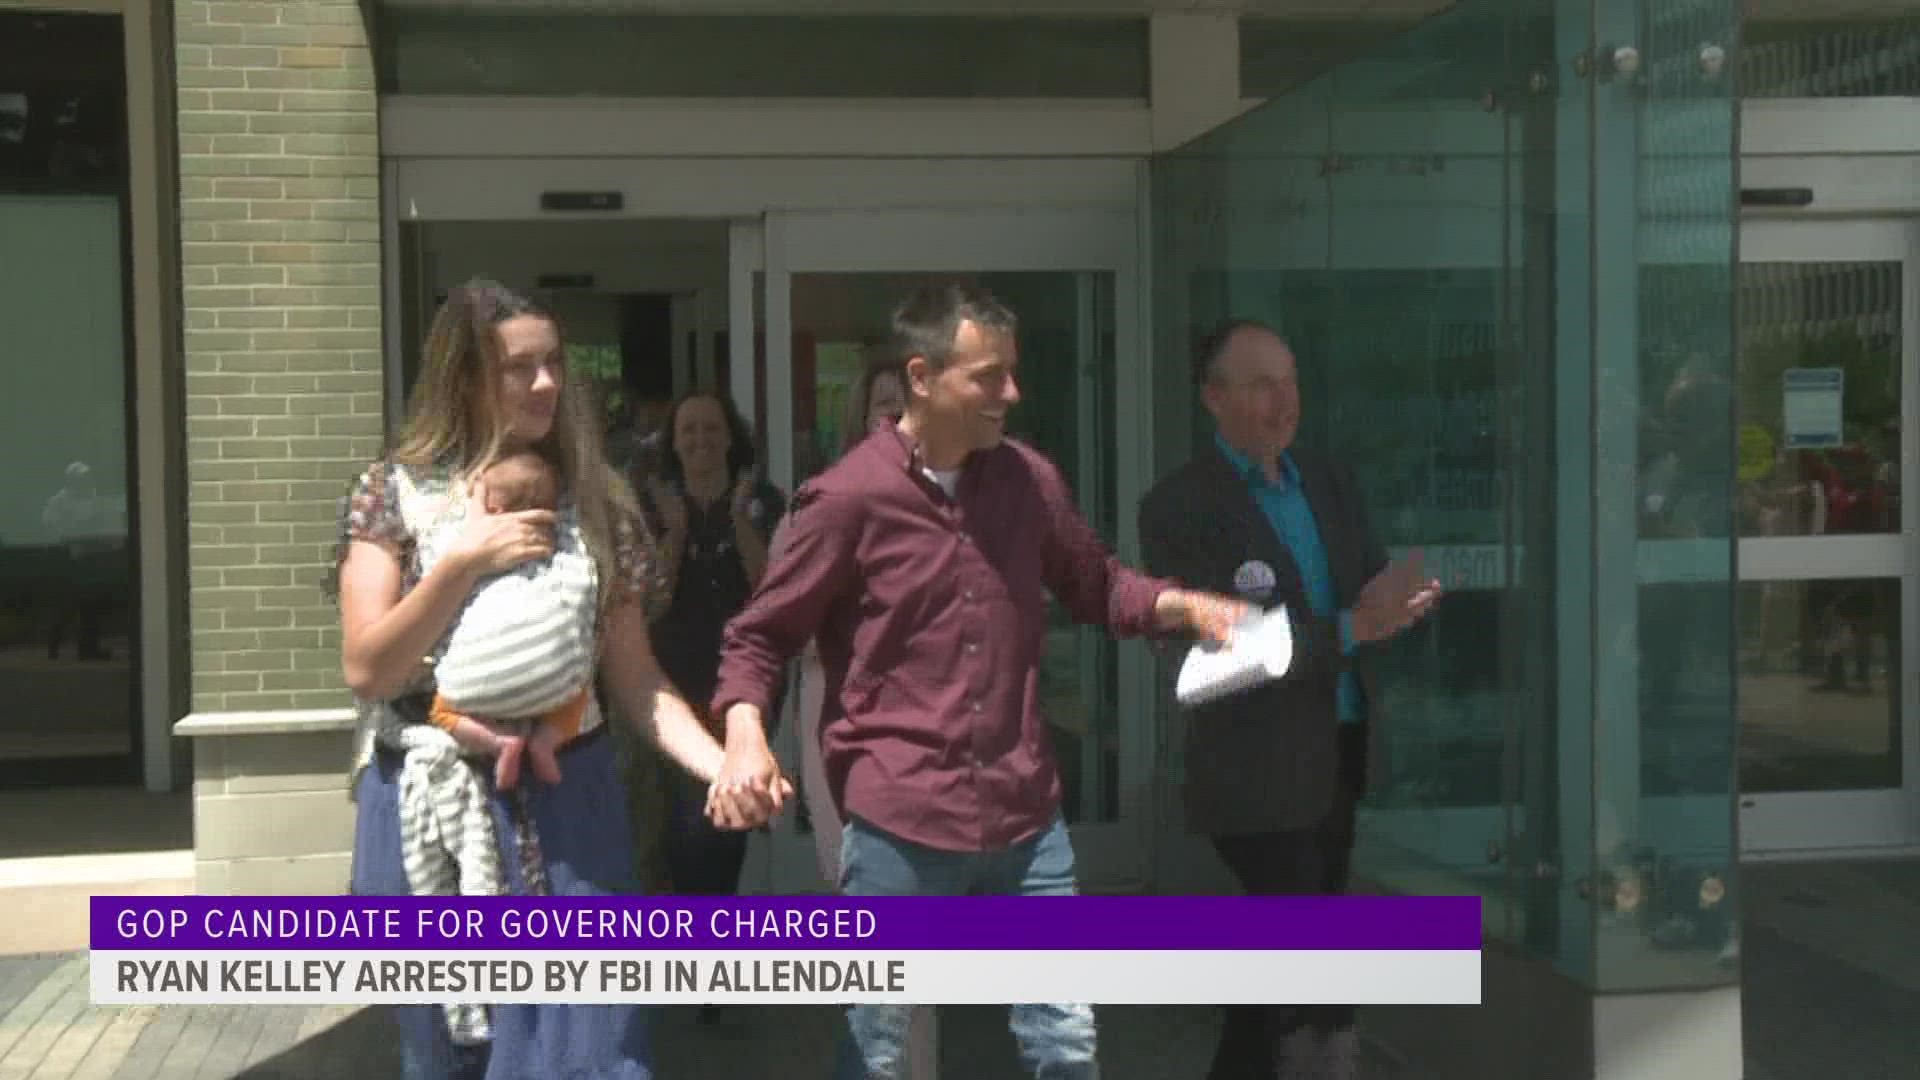 The FBI has confirmed that federal agents used a search warrant to search the Allendale home of Ryan Kelley Thursday and took him into custody.